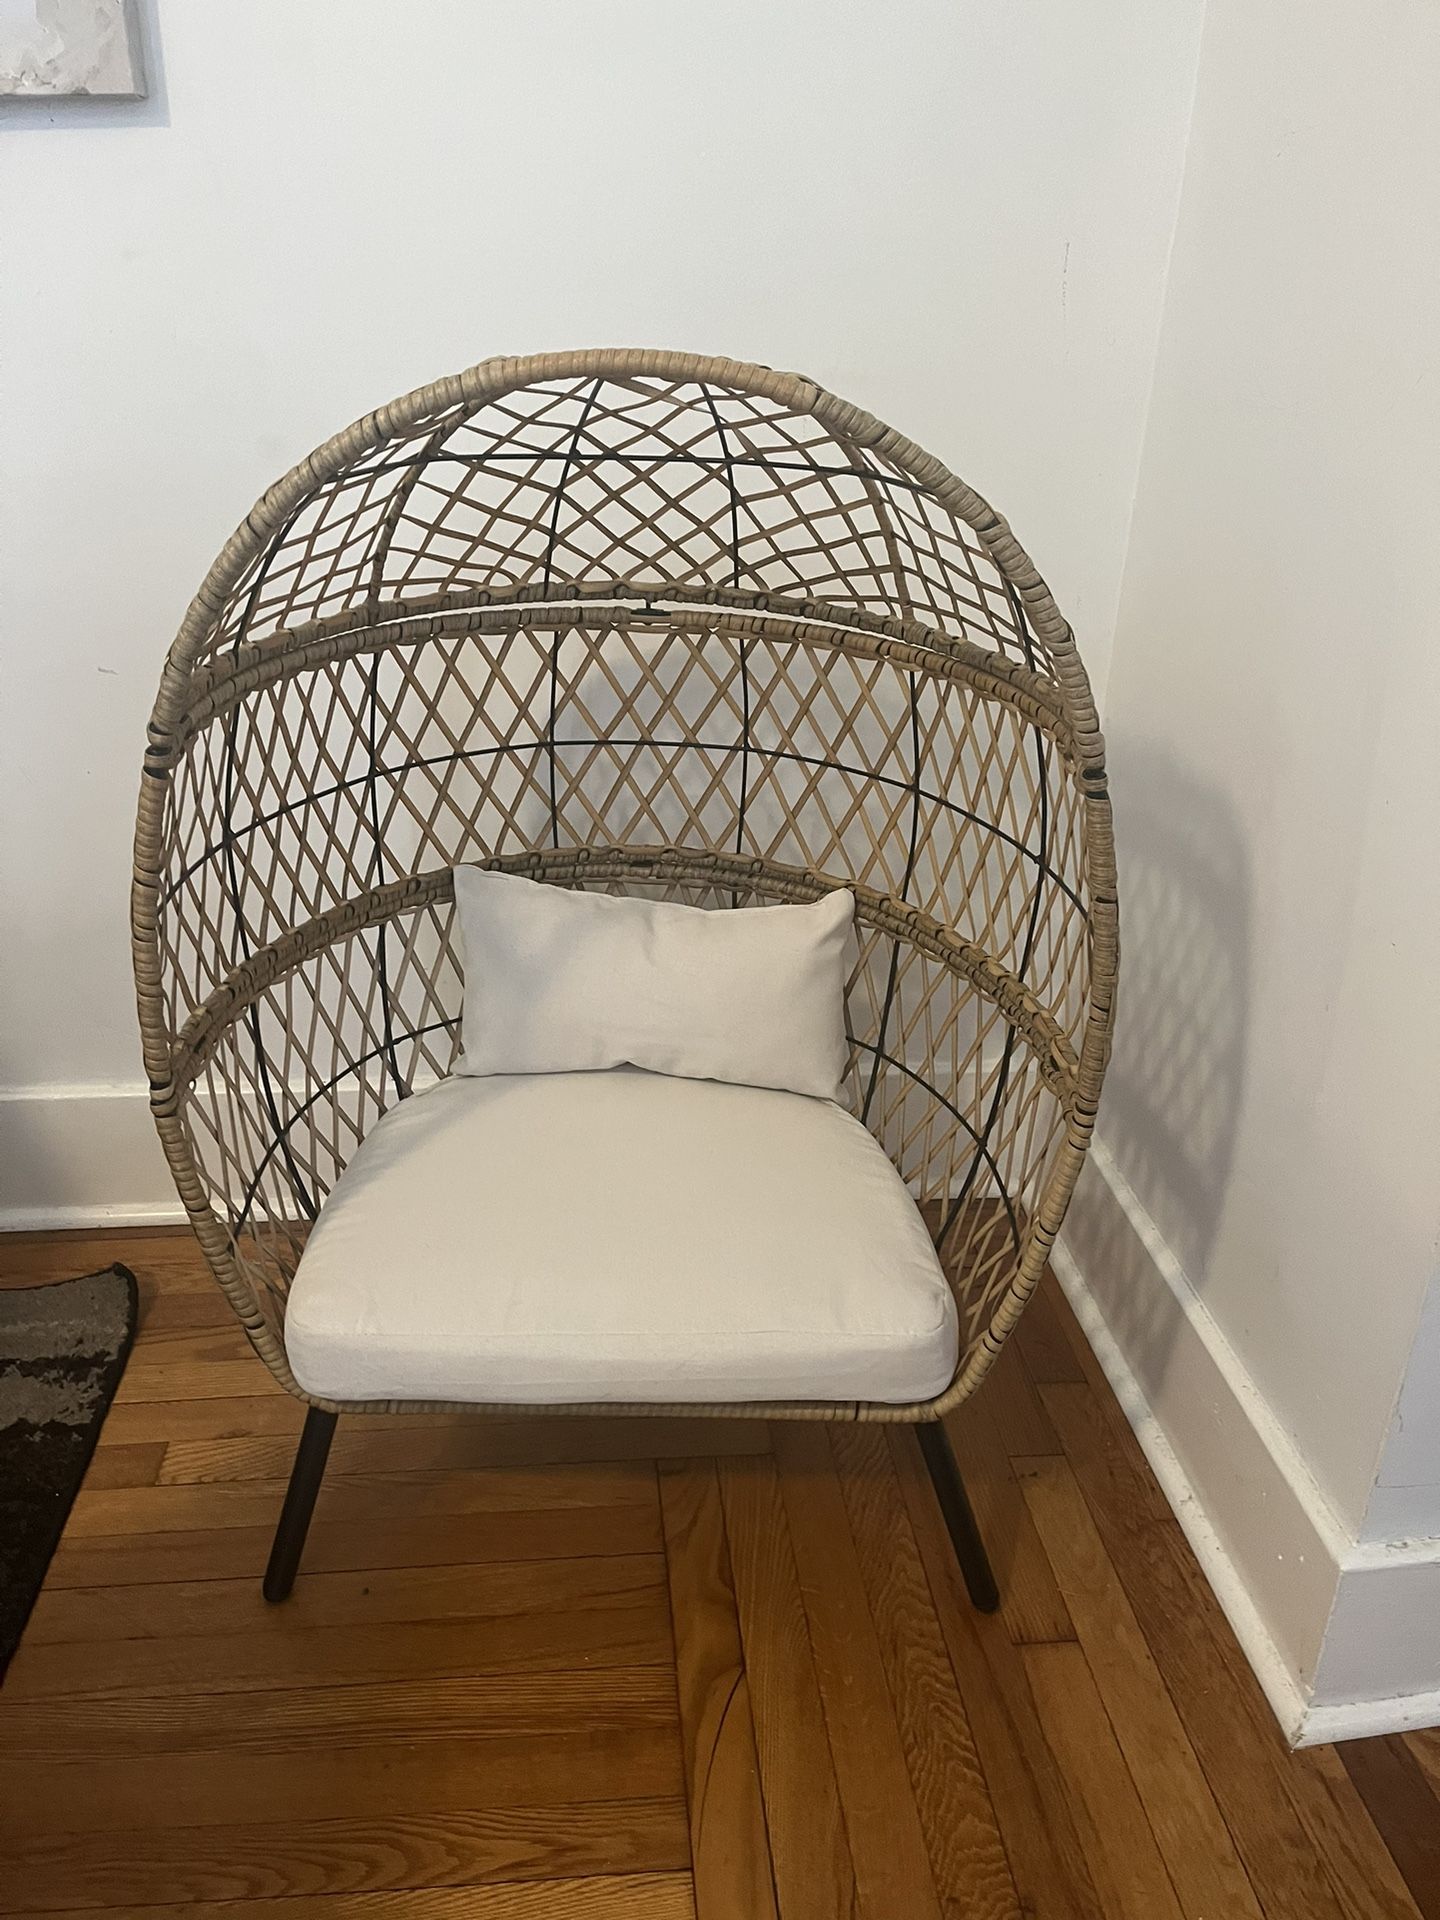 Wicker Chair For a ( Child Size ) Attention Not For Adults 